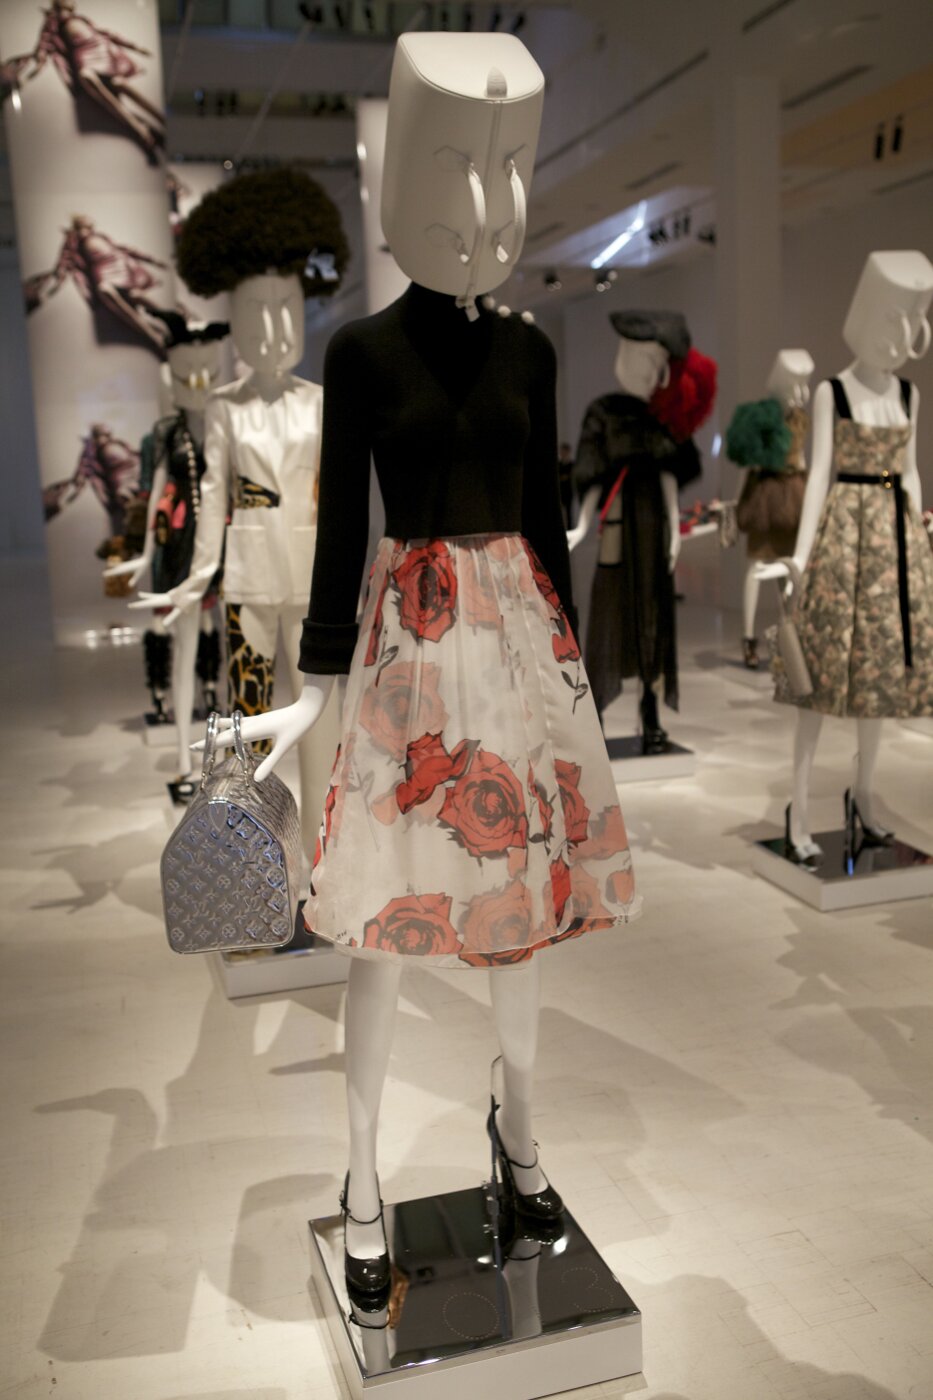 LOUIS VUITTON: THE ART OF FASHION EXHIBITION BY KATIE GRAND